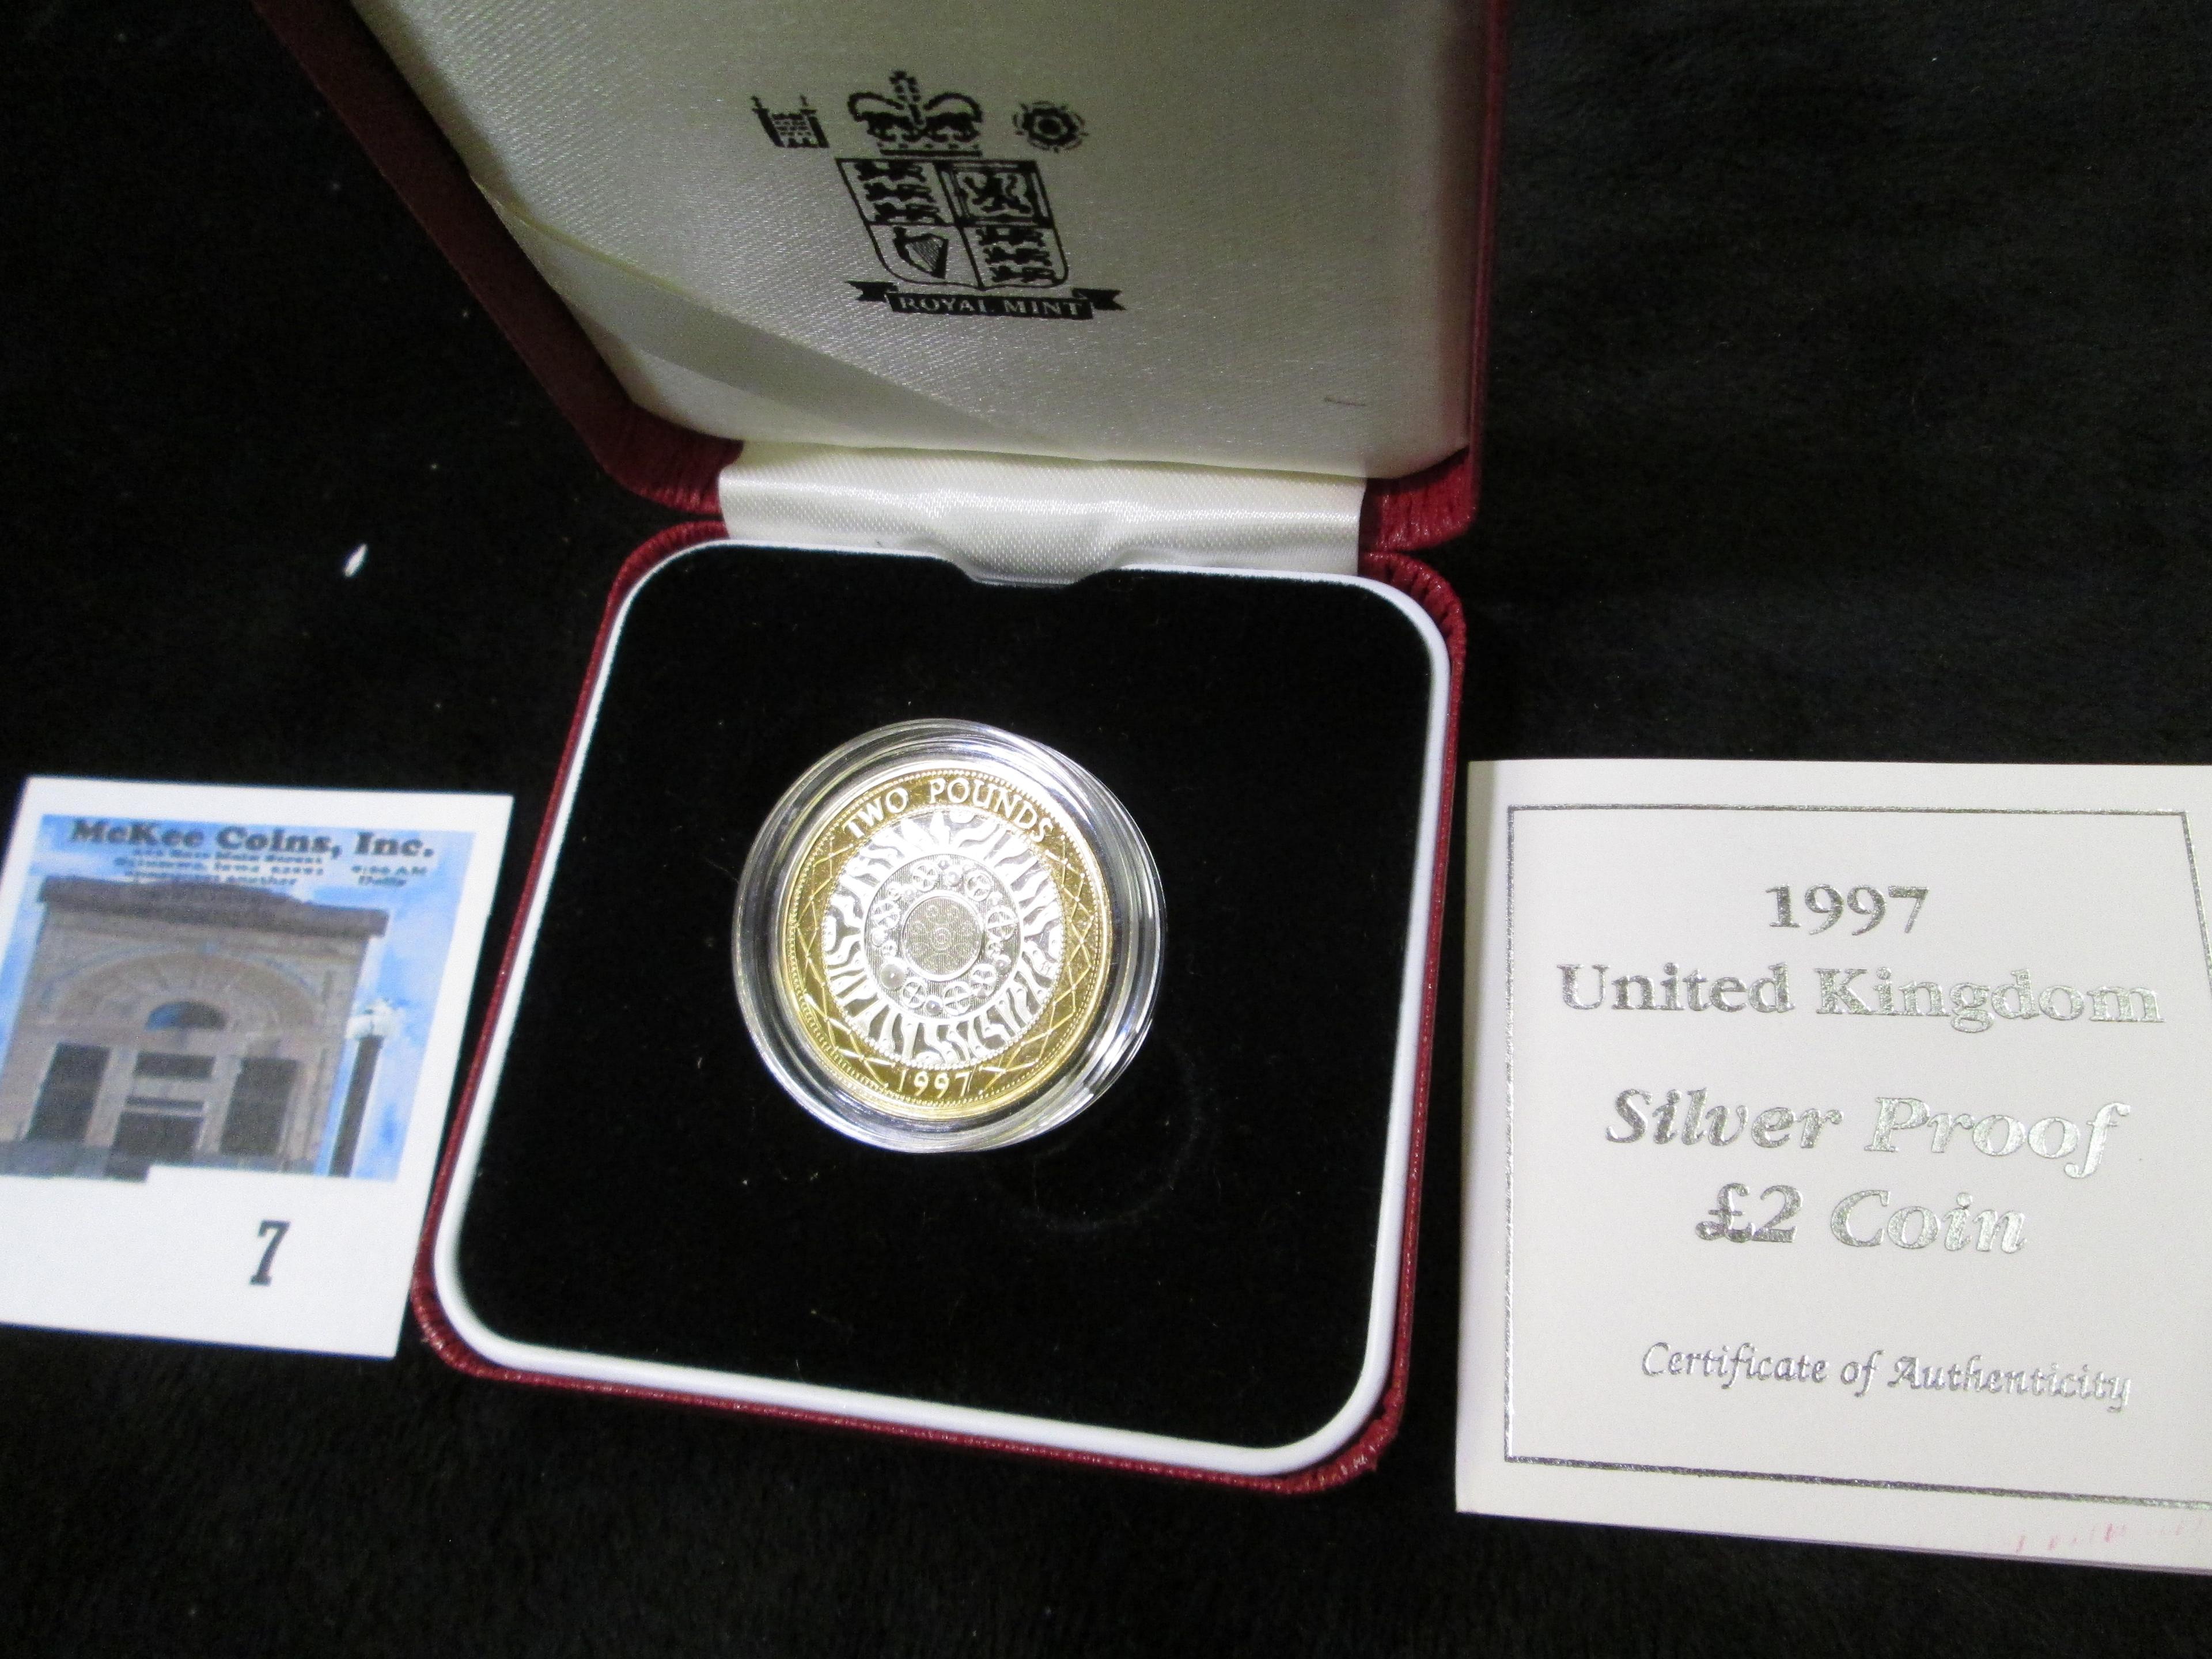 1997 United Kingdom Sterling Silver Proof Two Pound Coin.